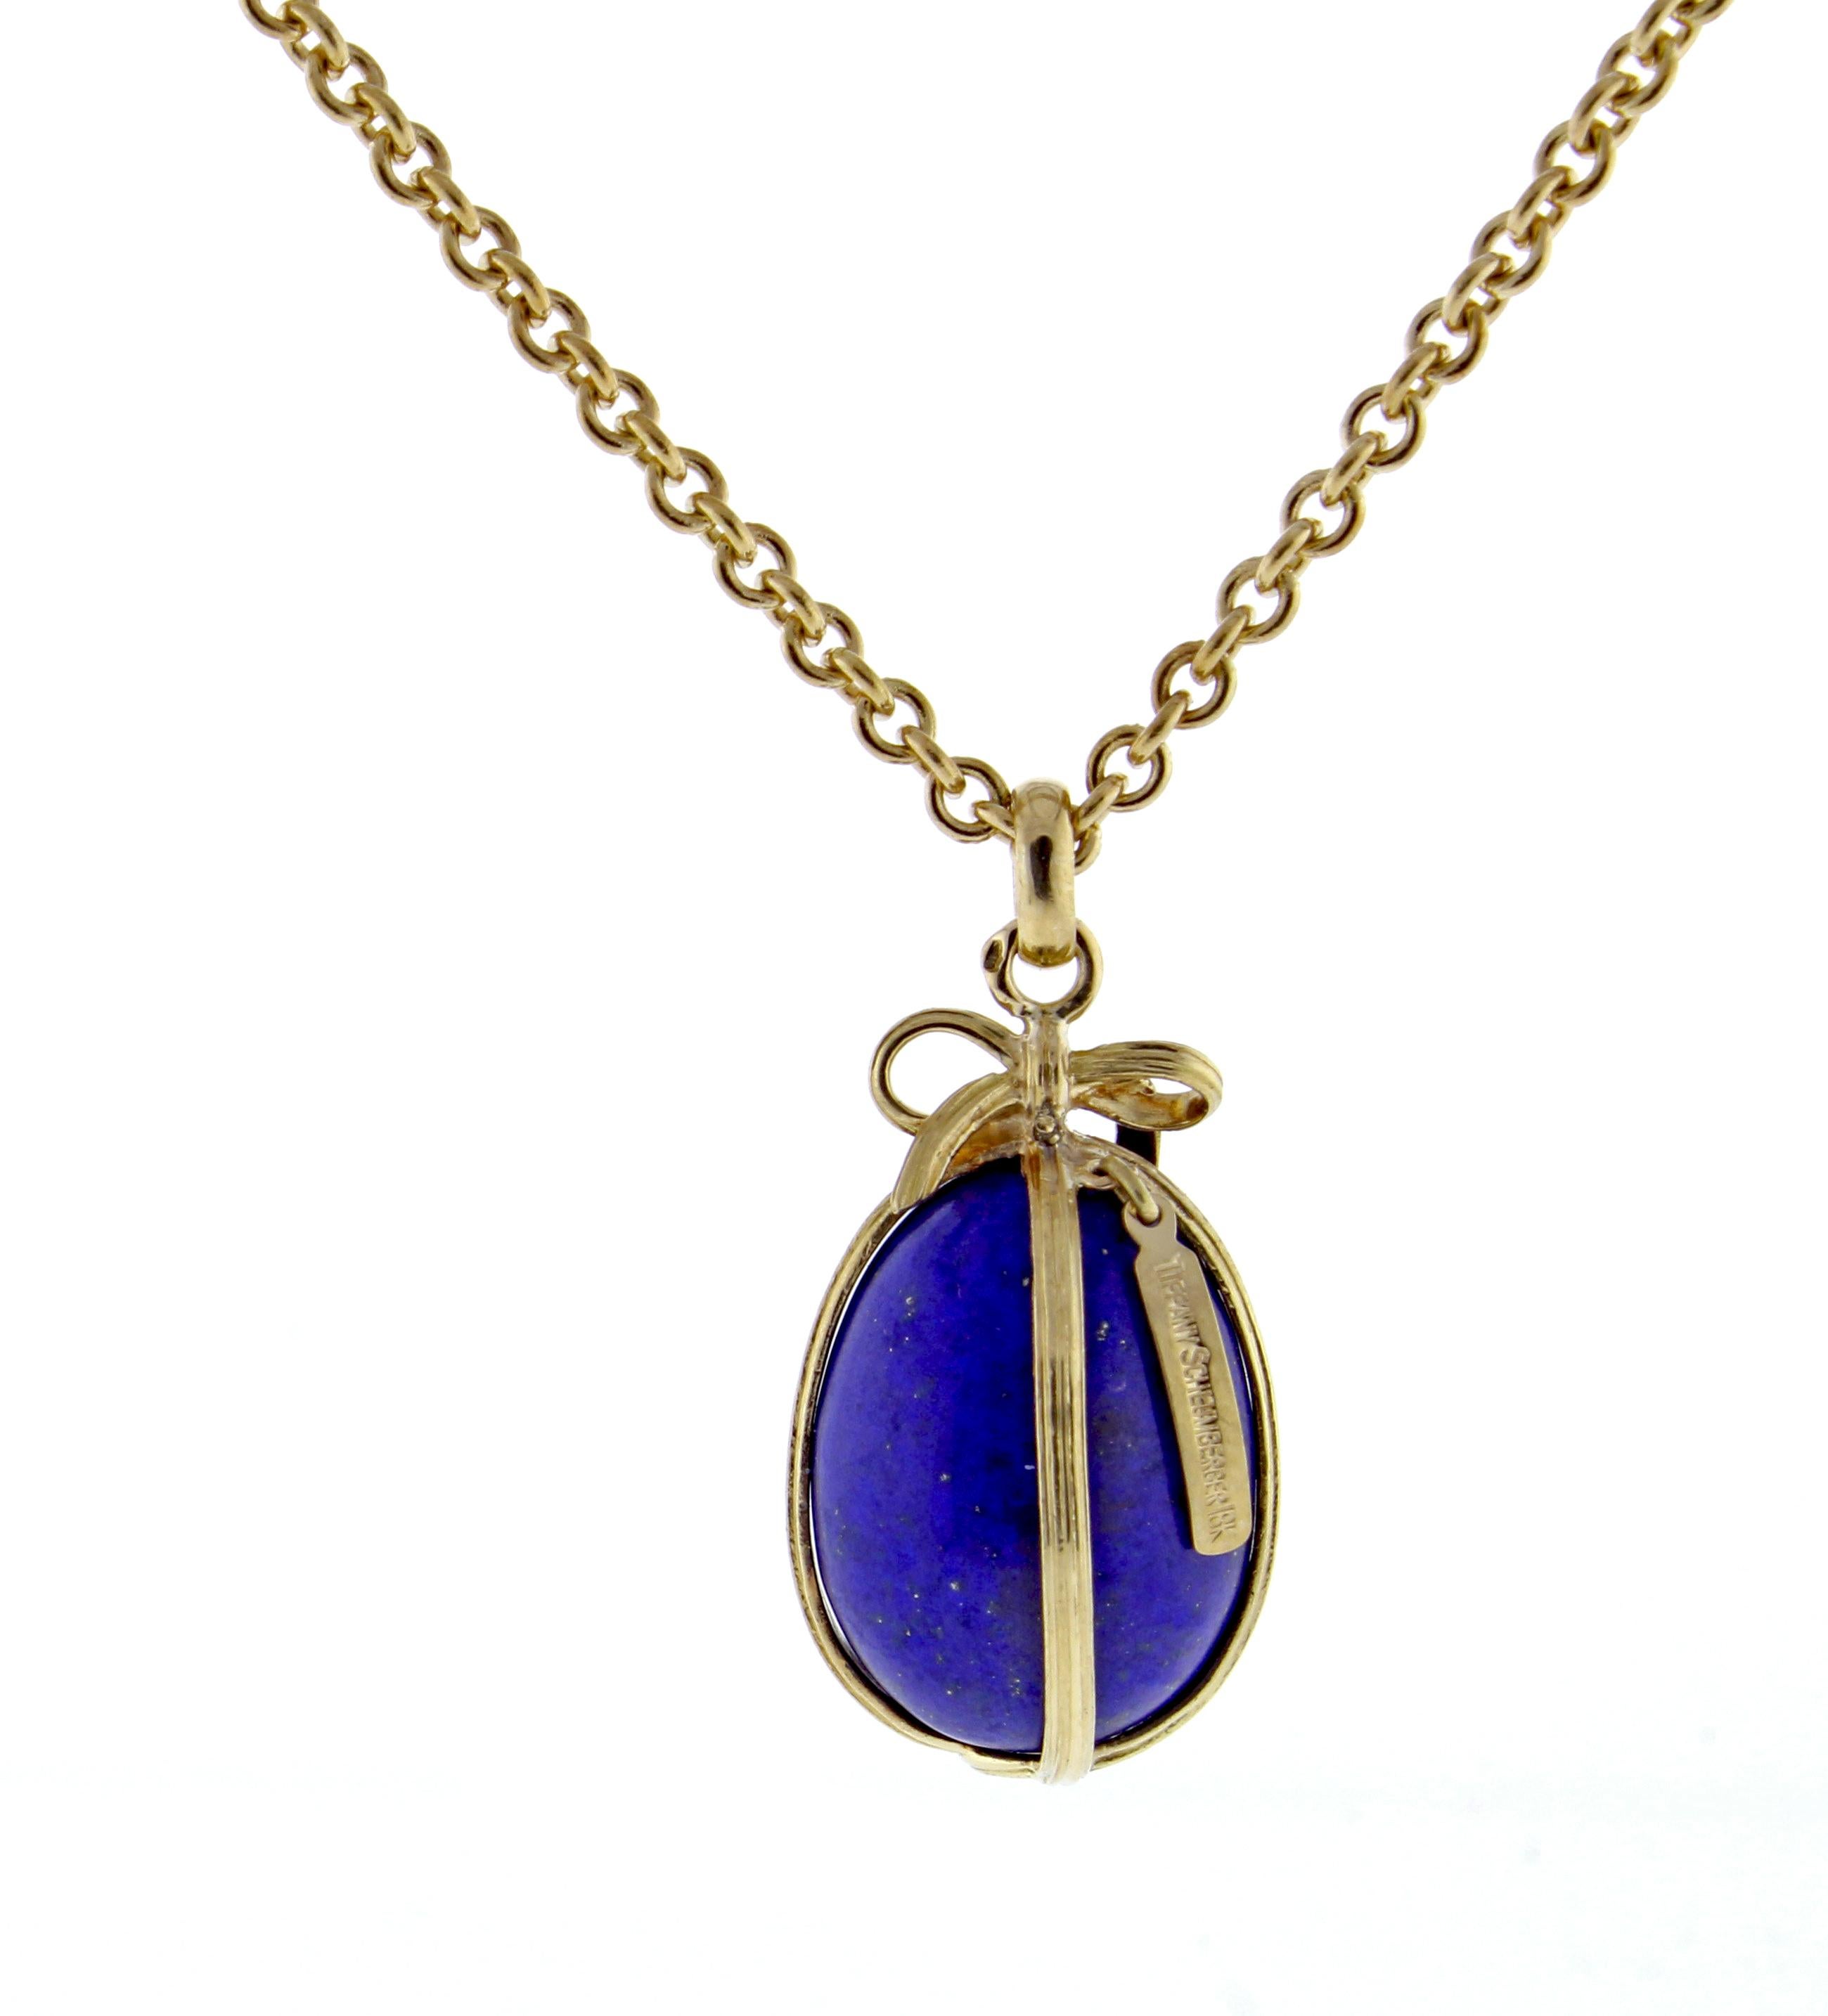 From Jean Schlumberger, his iconic egg pendant charm. Jean Schlumberger’s visionary creations are among the world’s most intricate designs. A gold ribbon elegantly accents this delicate charm.
lapis pendant 31*18mm
Tiffany & Co. necklace 18 inches